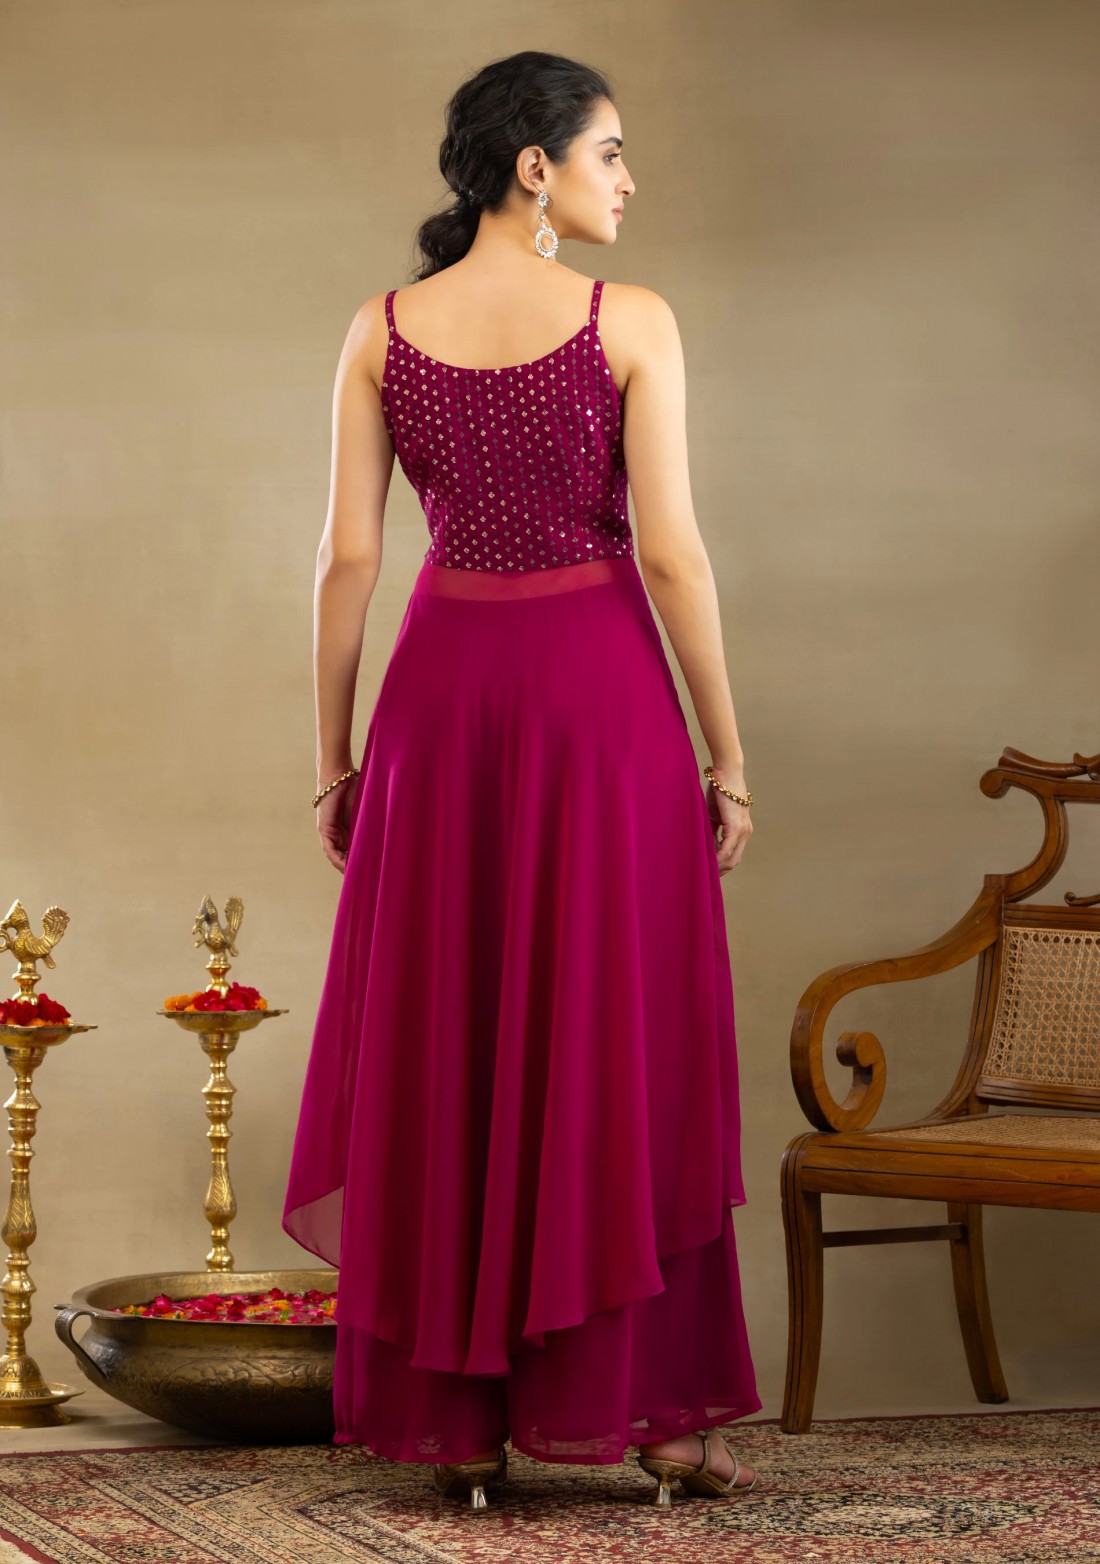 Sequins Embroidered Asymmetrical Wine Georgette Kurta Palazzo Set